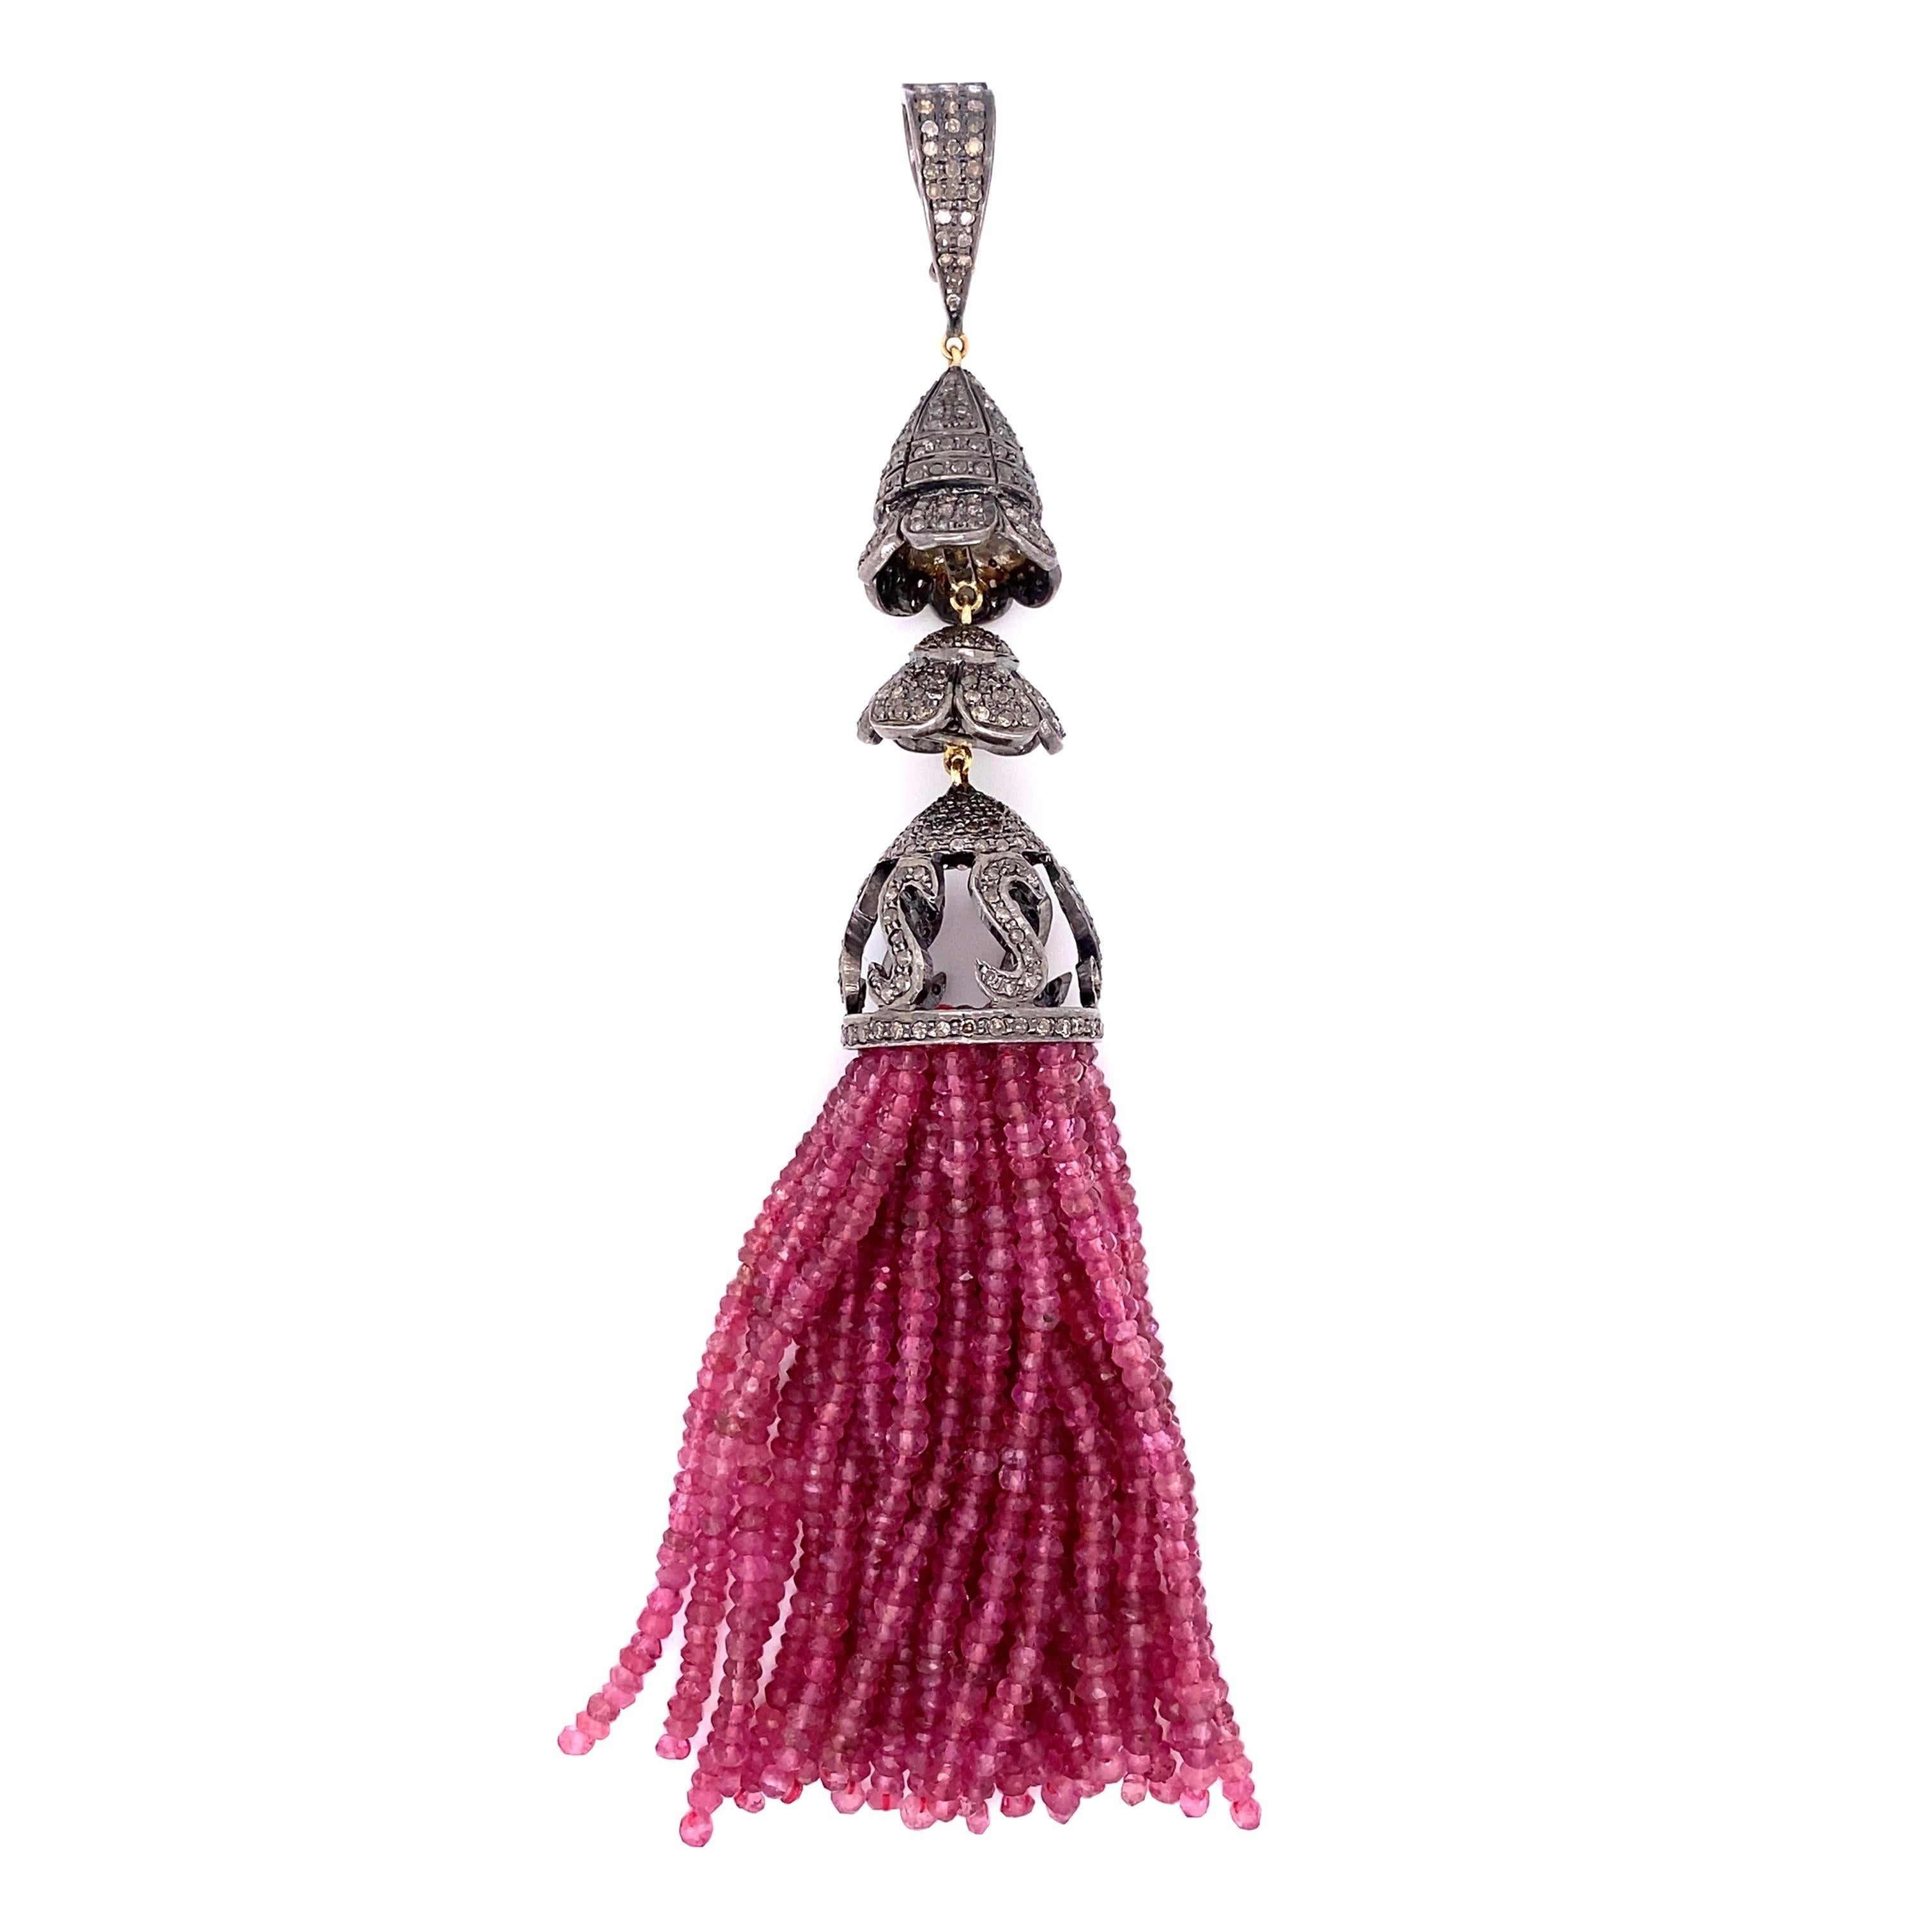 Simply Beautiful! Tourmaline Tassel and Diamond Pendant features a fine quality pink tourmaline, approx. 128.30tcw, enhanced with Hand set Diamonds, approx. 4.15tcw. Exquisite 14K and Sterling Silver Hand Crafted Workmanship! Measuring approx. 5”